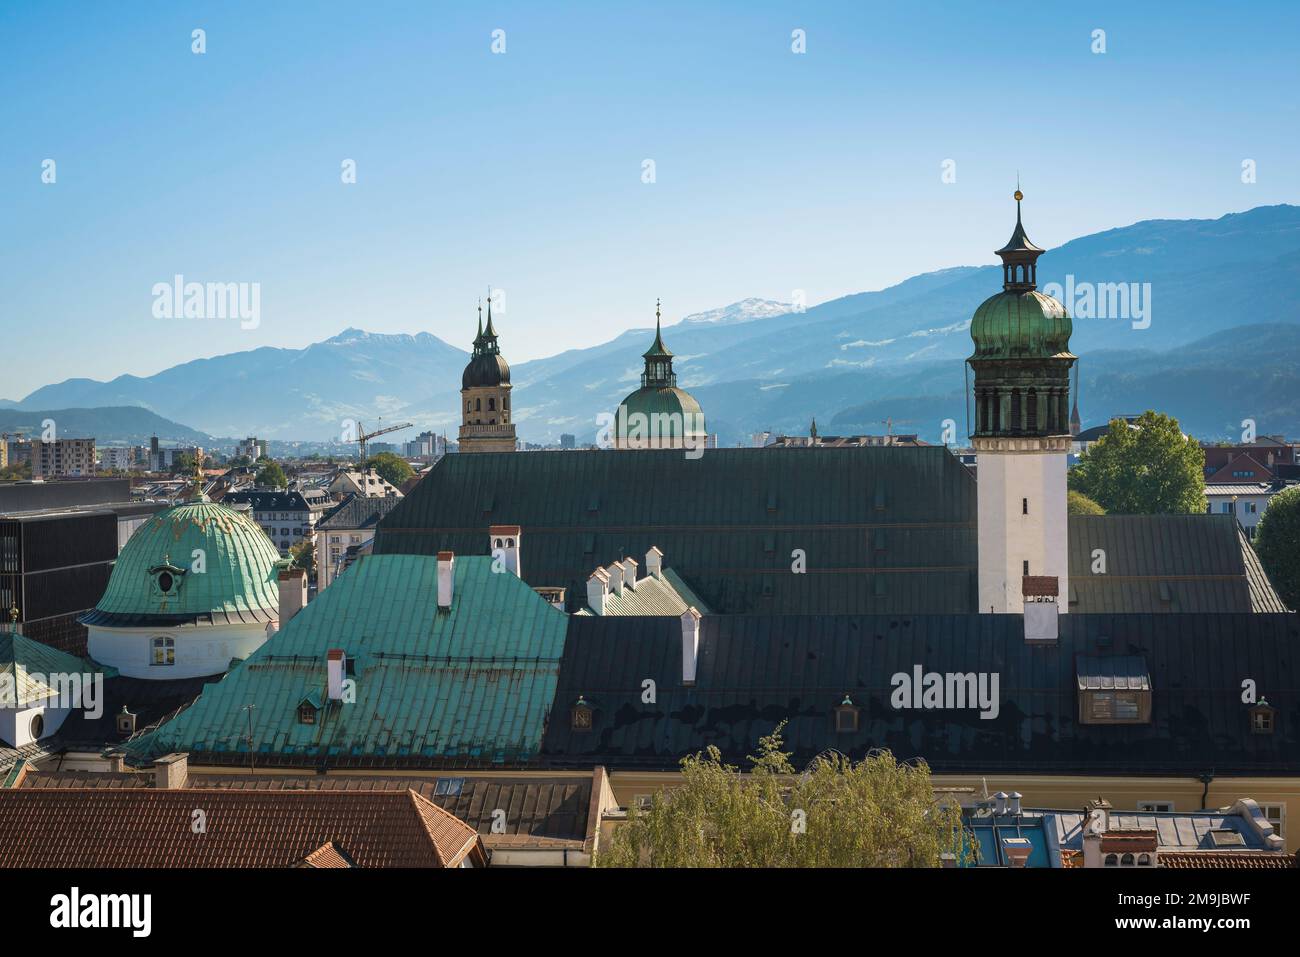 Innsbruck Hofburg, view of the roofline of the Hofkirche, the Baroque church of the Hofburg Palace, viewed against the Austrian alps, Innsbruck Stock Photo